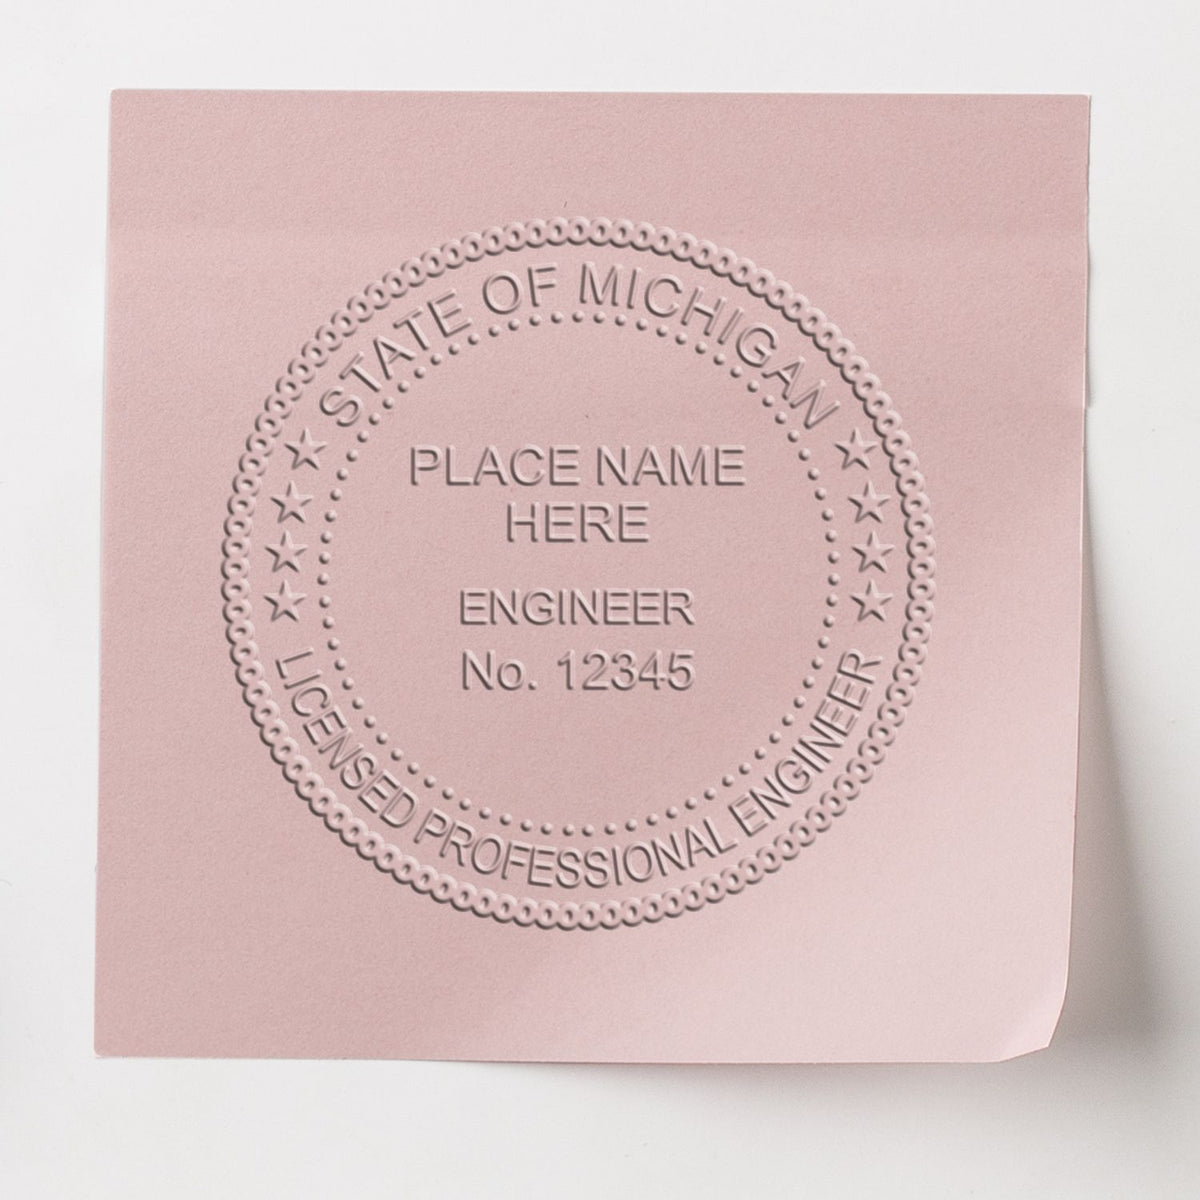 An in use photo of the Gift Michigan Engineer Seal showing a sample imprint on a cardstock